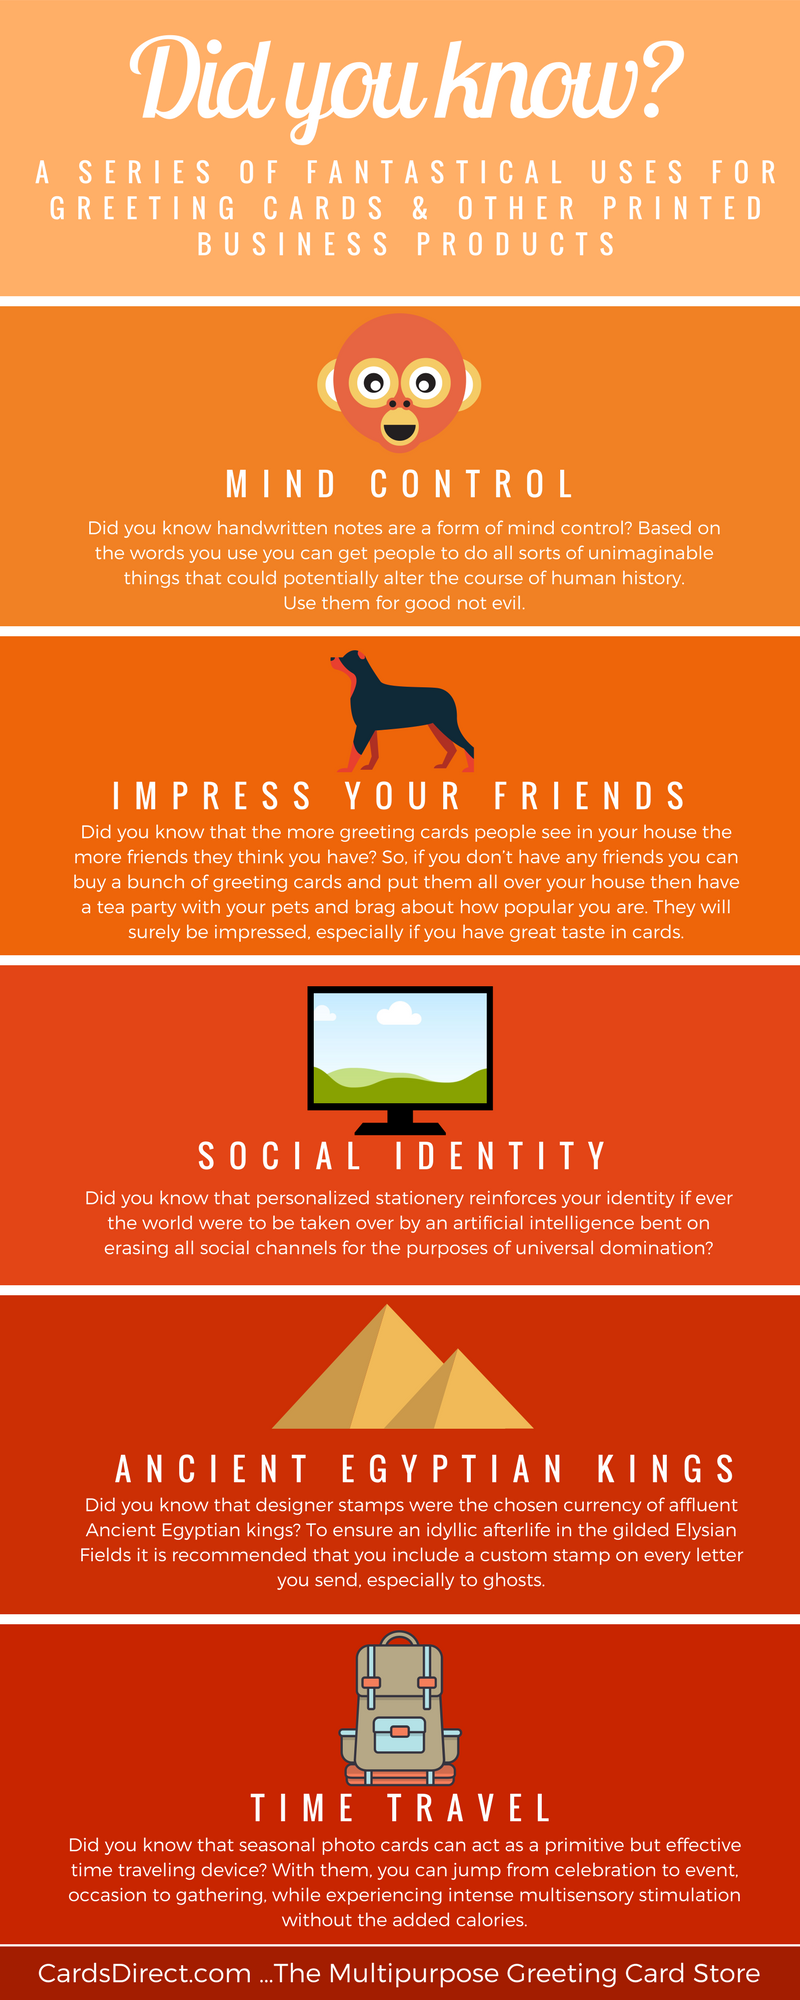 A series of infographics that are stacked on top of each other, against a vibrant orange background. The infographics include a monkey-like face with bulging eyes, a dog, a modern computer monitor, Egyptian pyramids, and a backpack. Below the images are various captions that range in topics; from social identity to time travel, with corresponding text underneath.